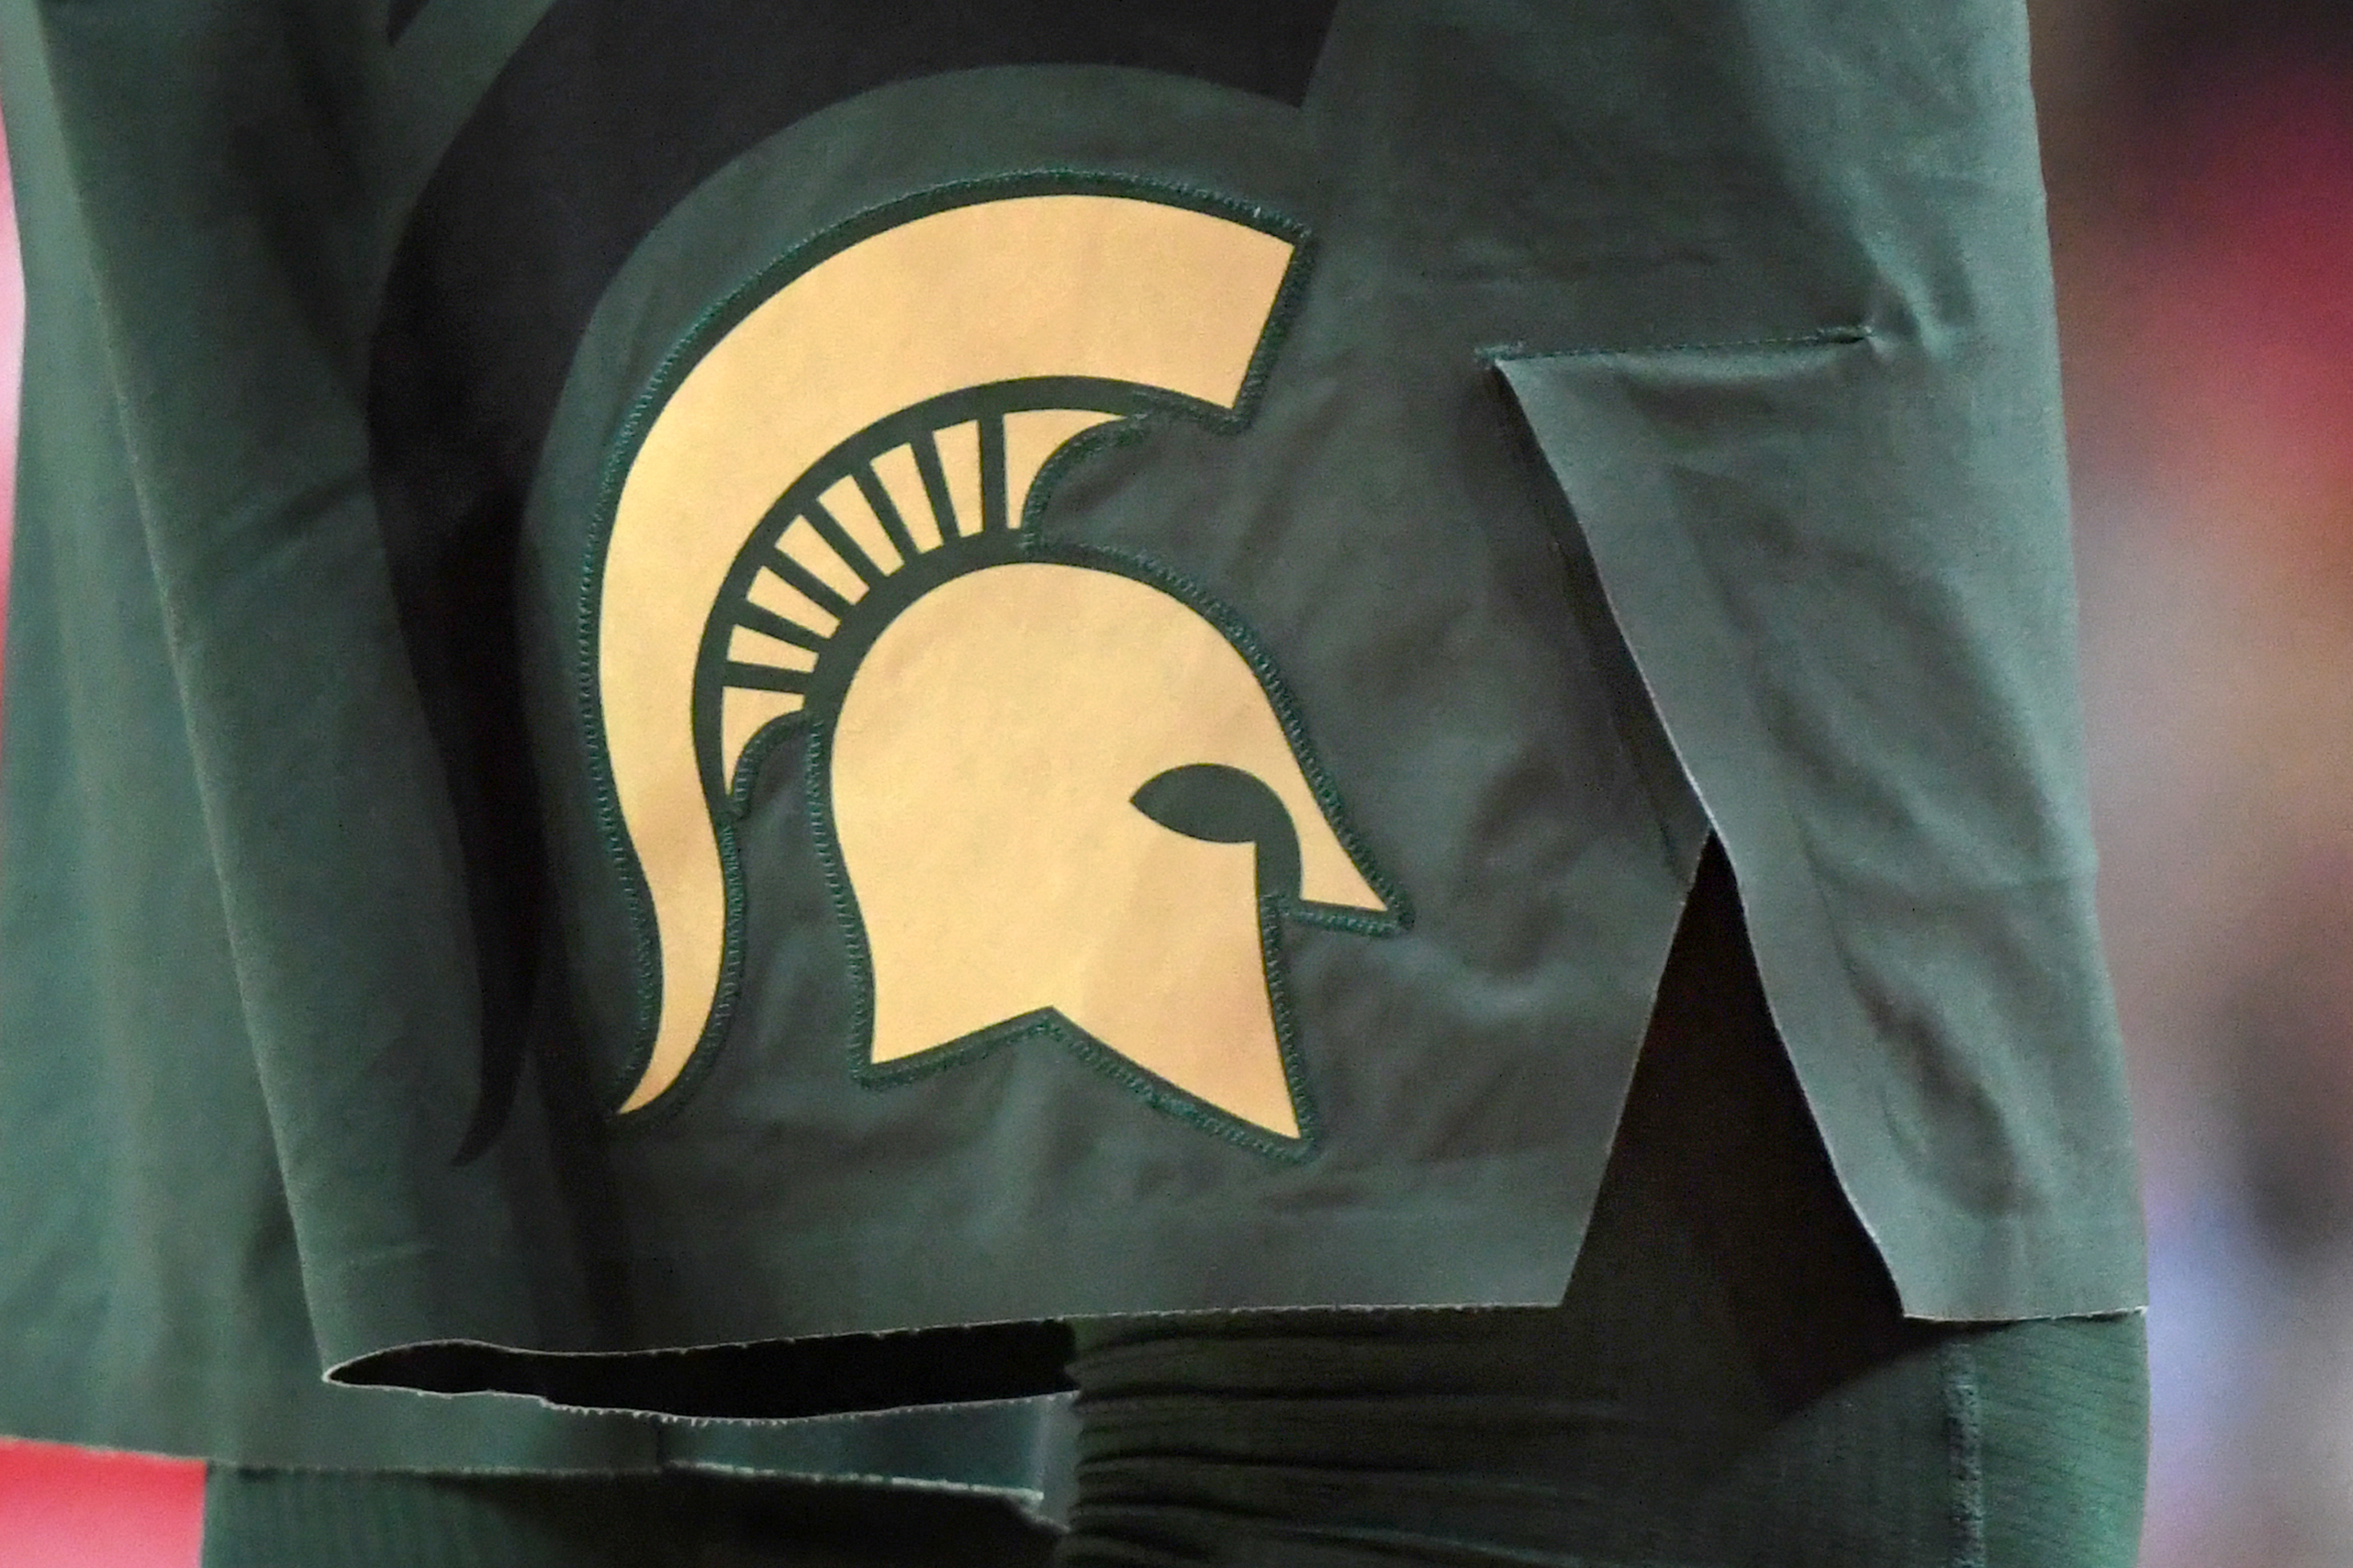 The Michigan State Spartans logo on a pair of shorts during a college basketball game against the Maryland Terrapins at The Xfinity Center on January 28, 2018 in College Park, Maryland.  The Spartans won 74-68.  (Photo by Mitchell Layton/Getty Images) 